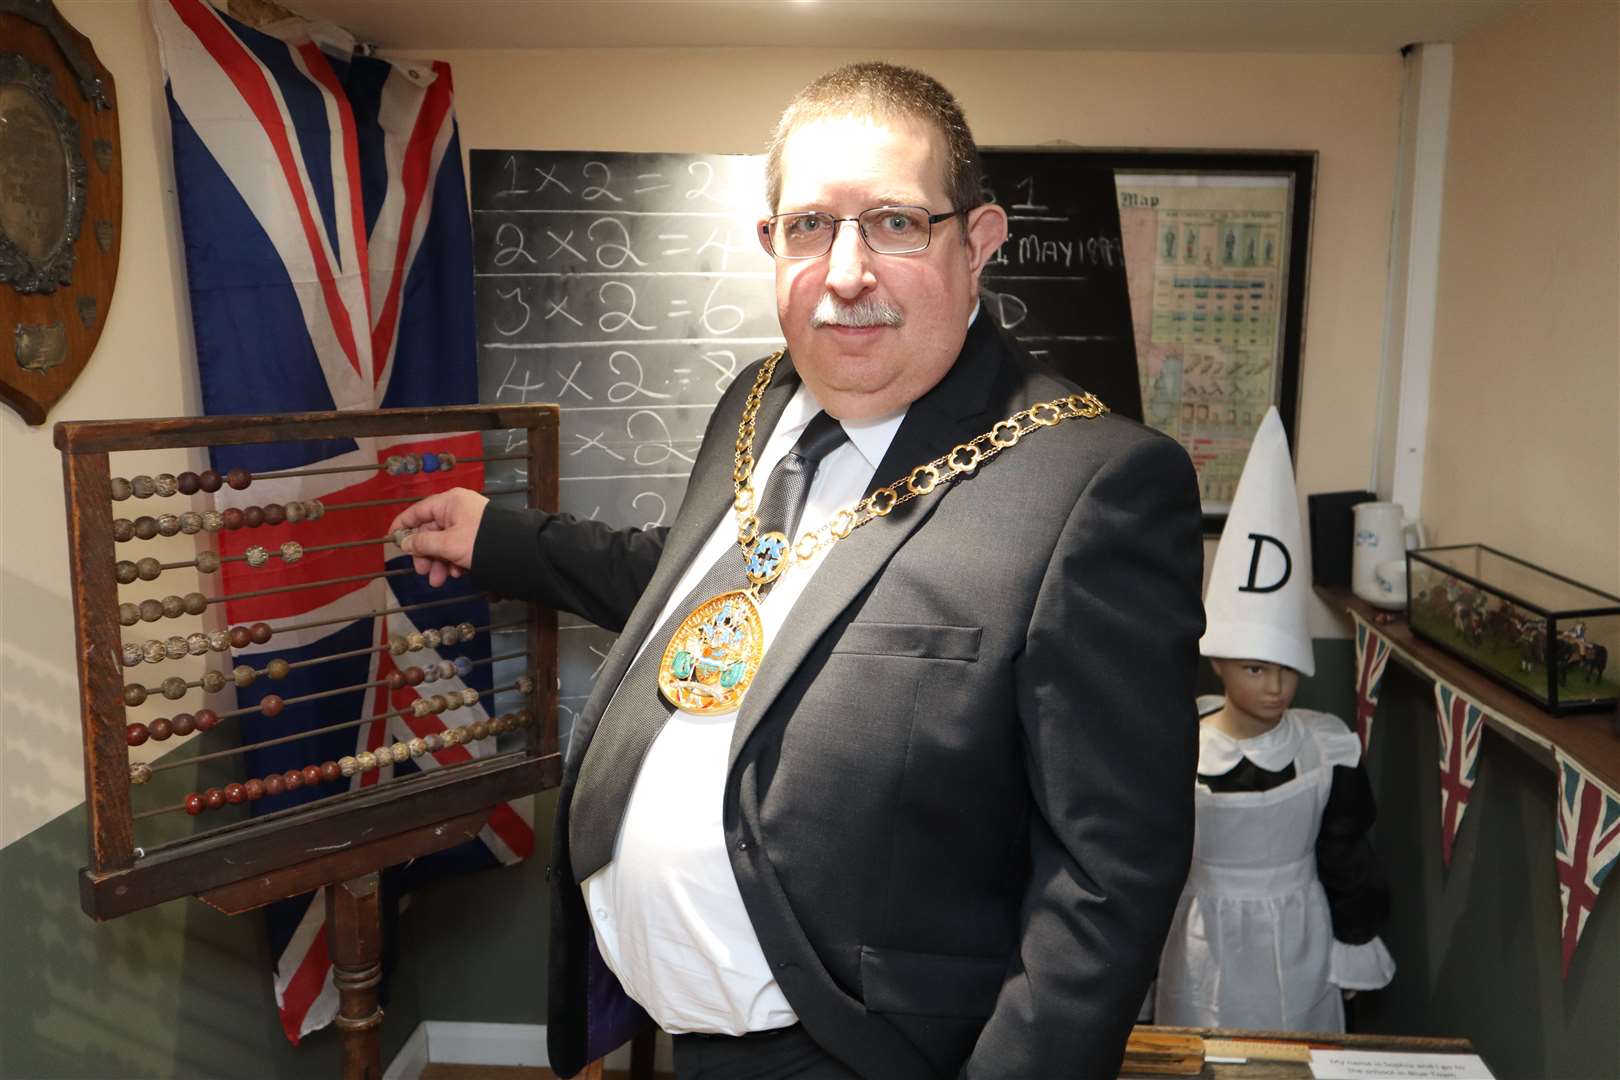 Swale mayor Simon Clark goes back to school at the Criterion Theatre and Blue Town Heritage Centre. The classroom has an abacus counting frame, chalk blackboard, desks and a dunce's hat